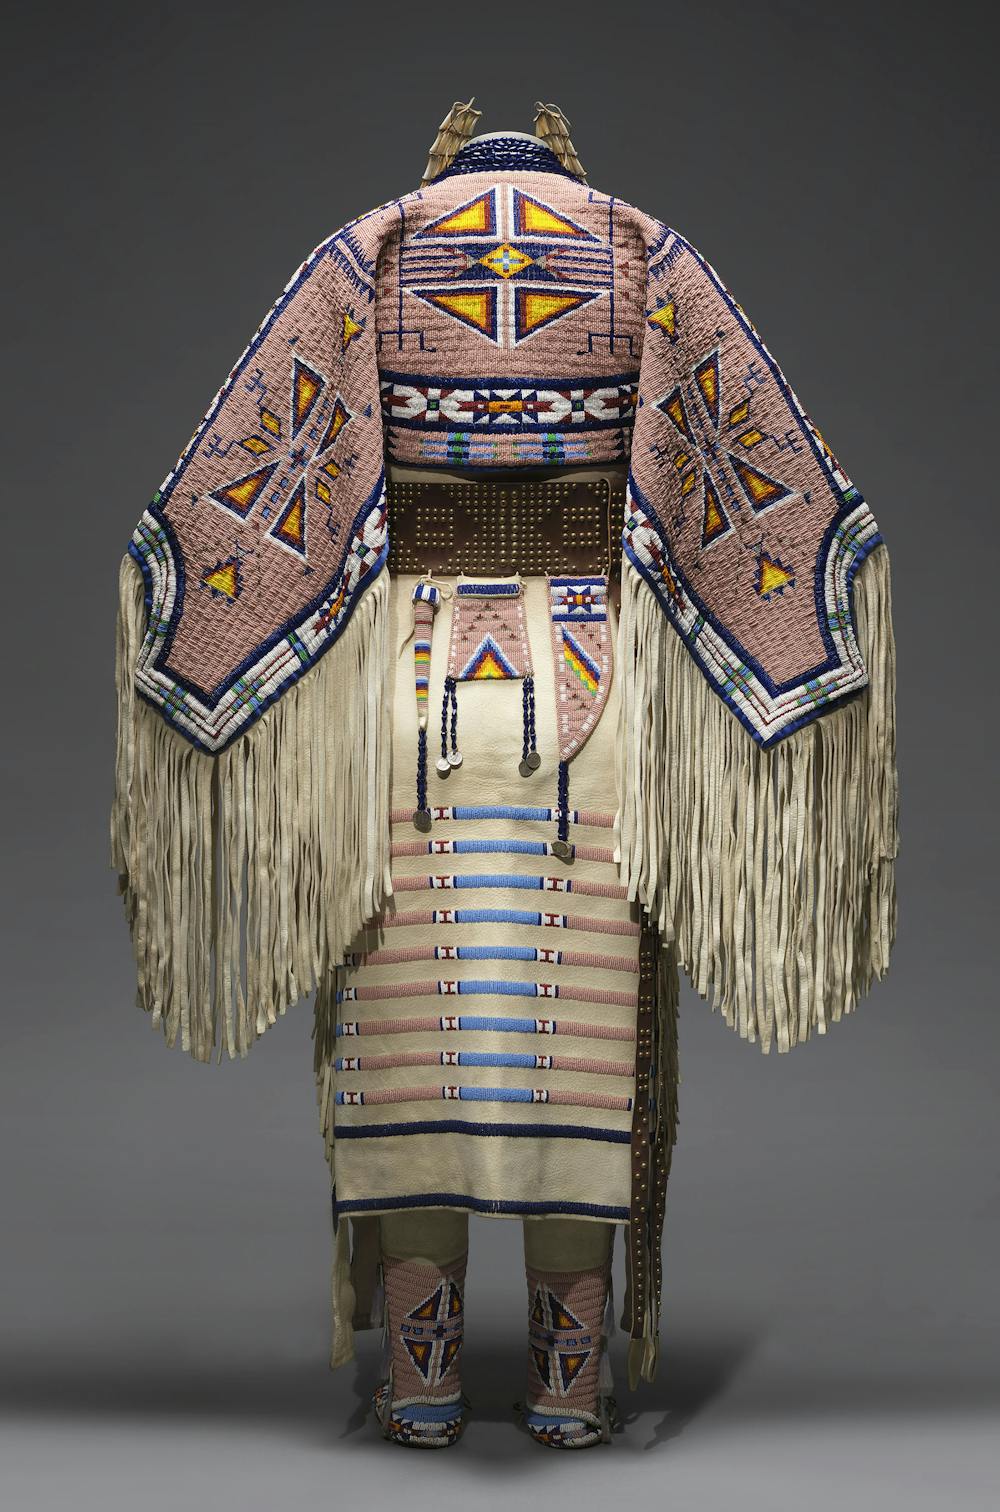 From the Great Plains, Native American masterpieces emerged